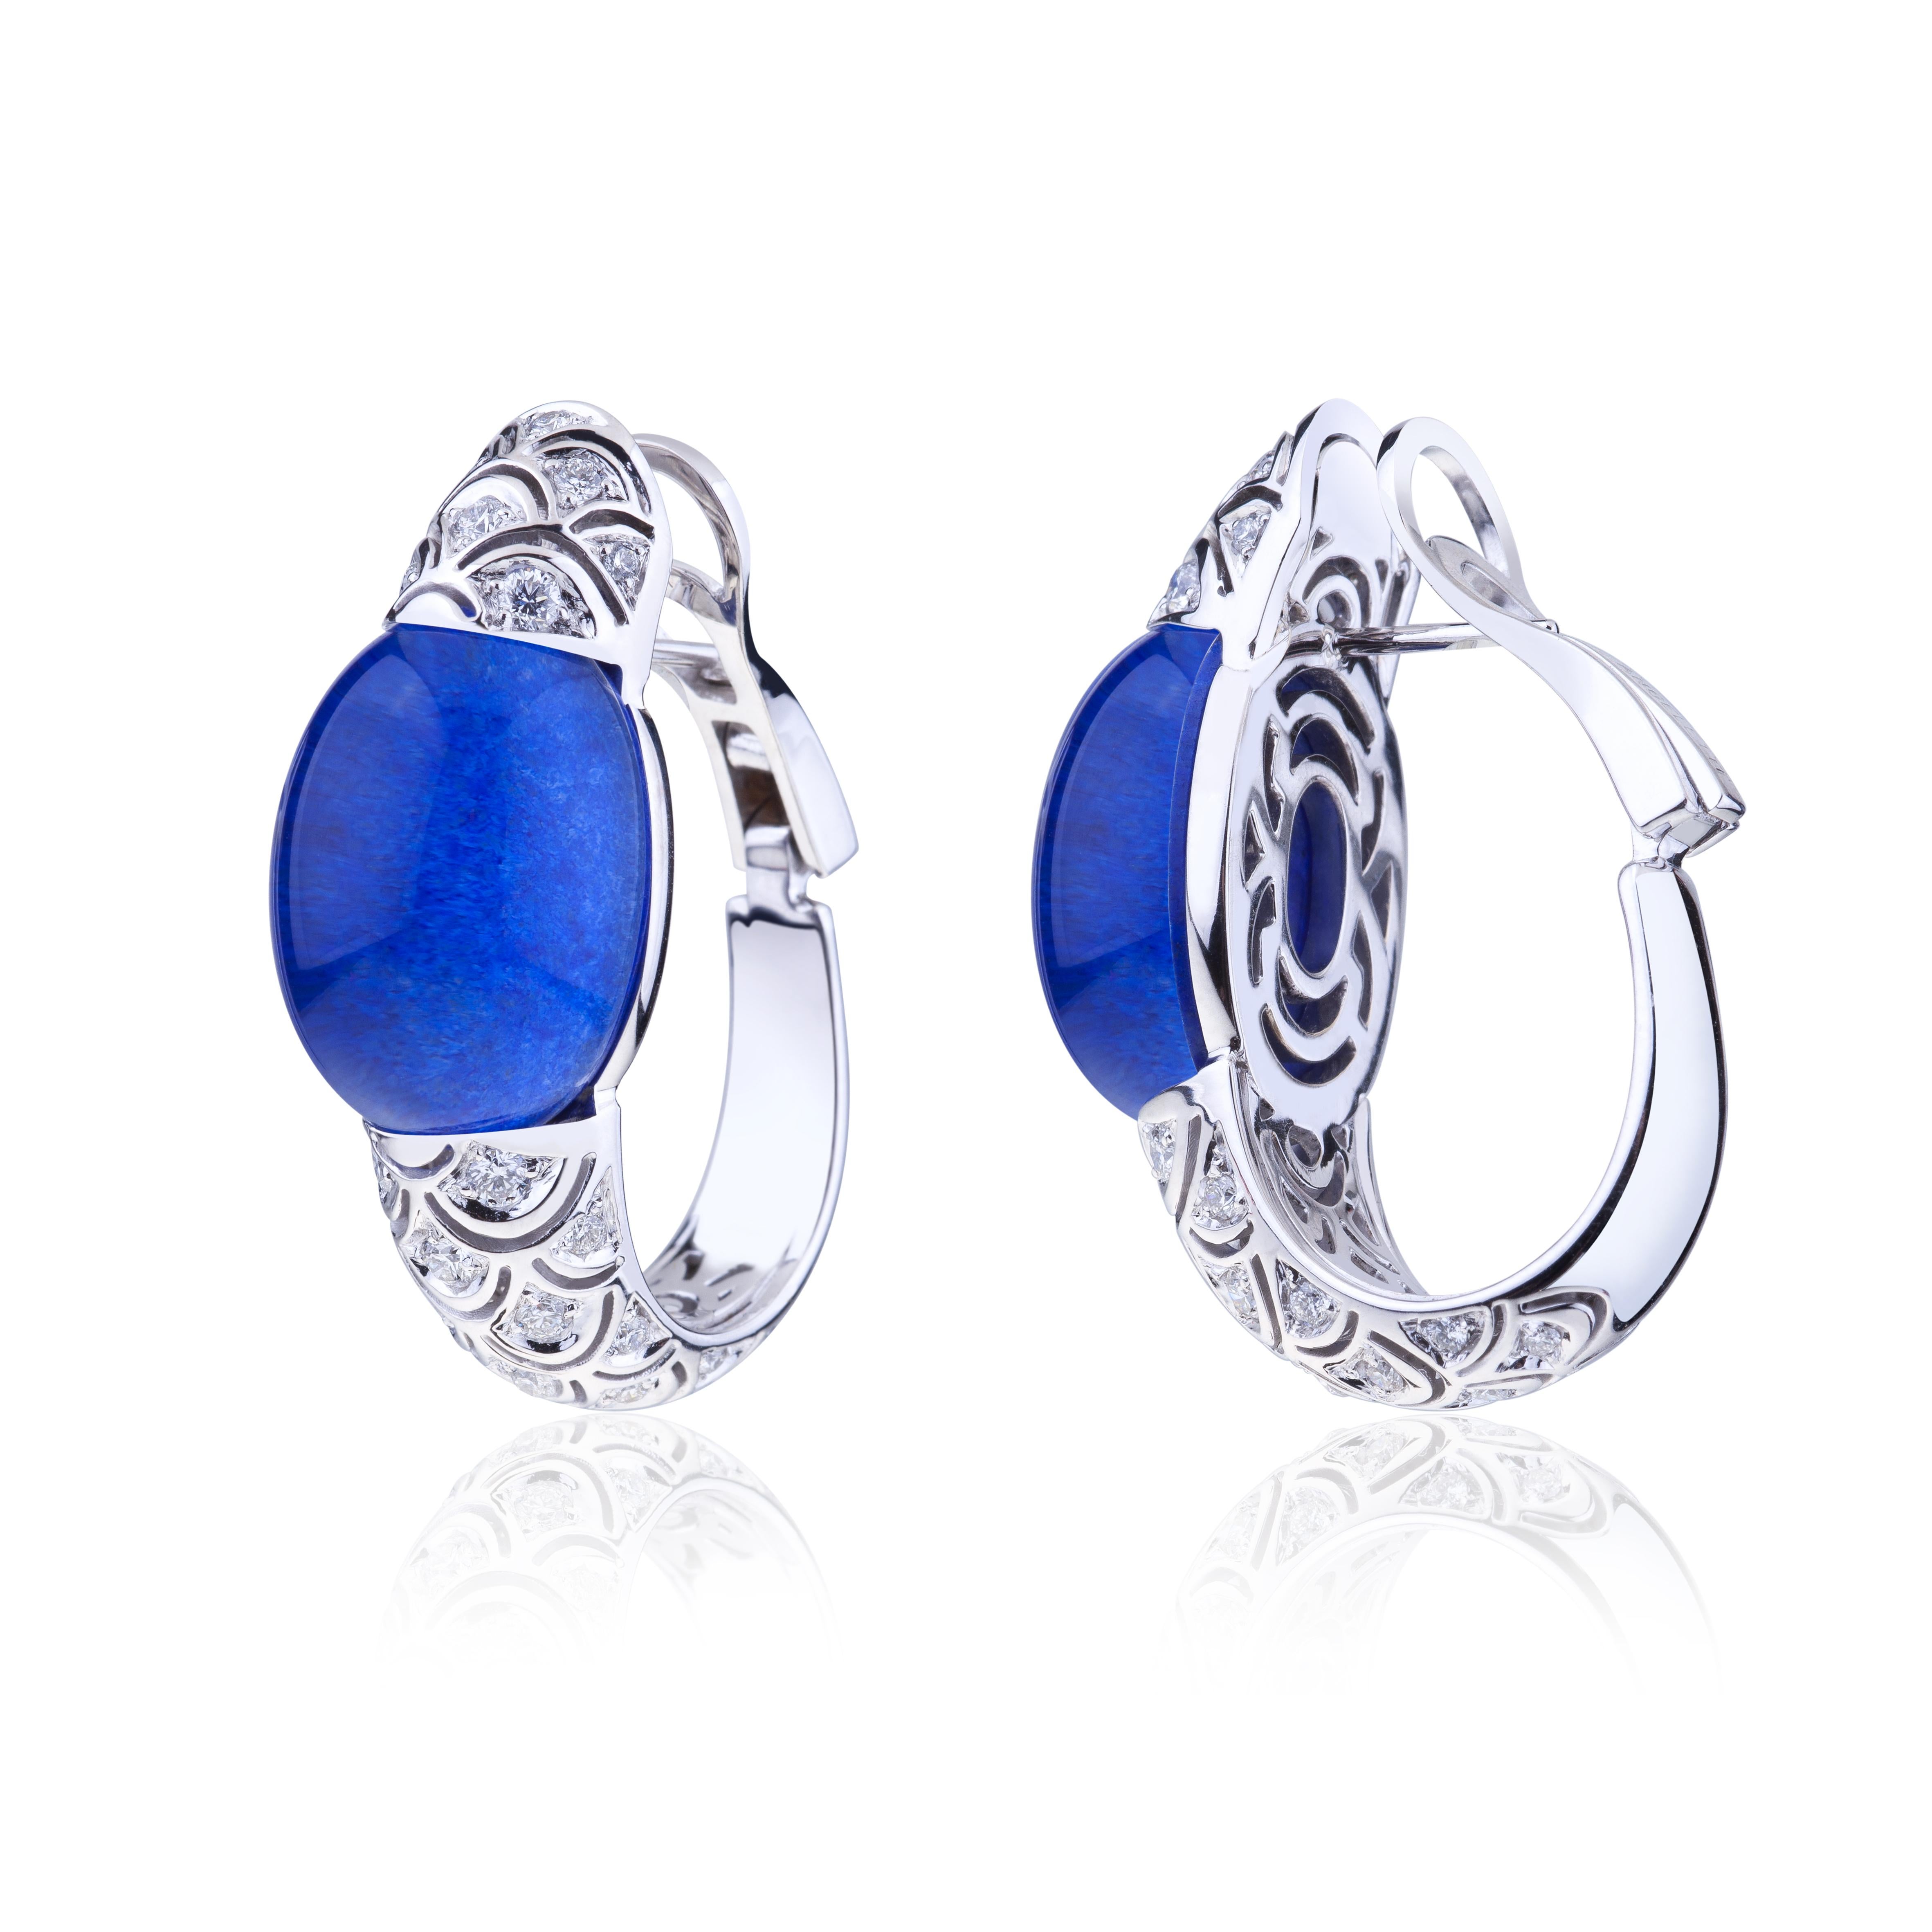 Angeletti Embrace White Gold With Diamonds Cabochon Lapislazzuli Hoop Earrings.
New Wave Version, Designed and Manifactured in Rome. Large size and impressive proportions. 
Angeletti Boasts an Exceptional History Made of Pure Jewelry Tradition, a